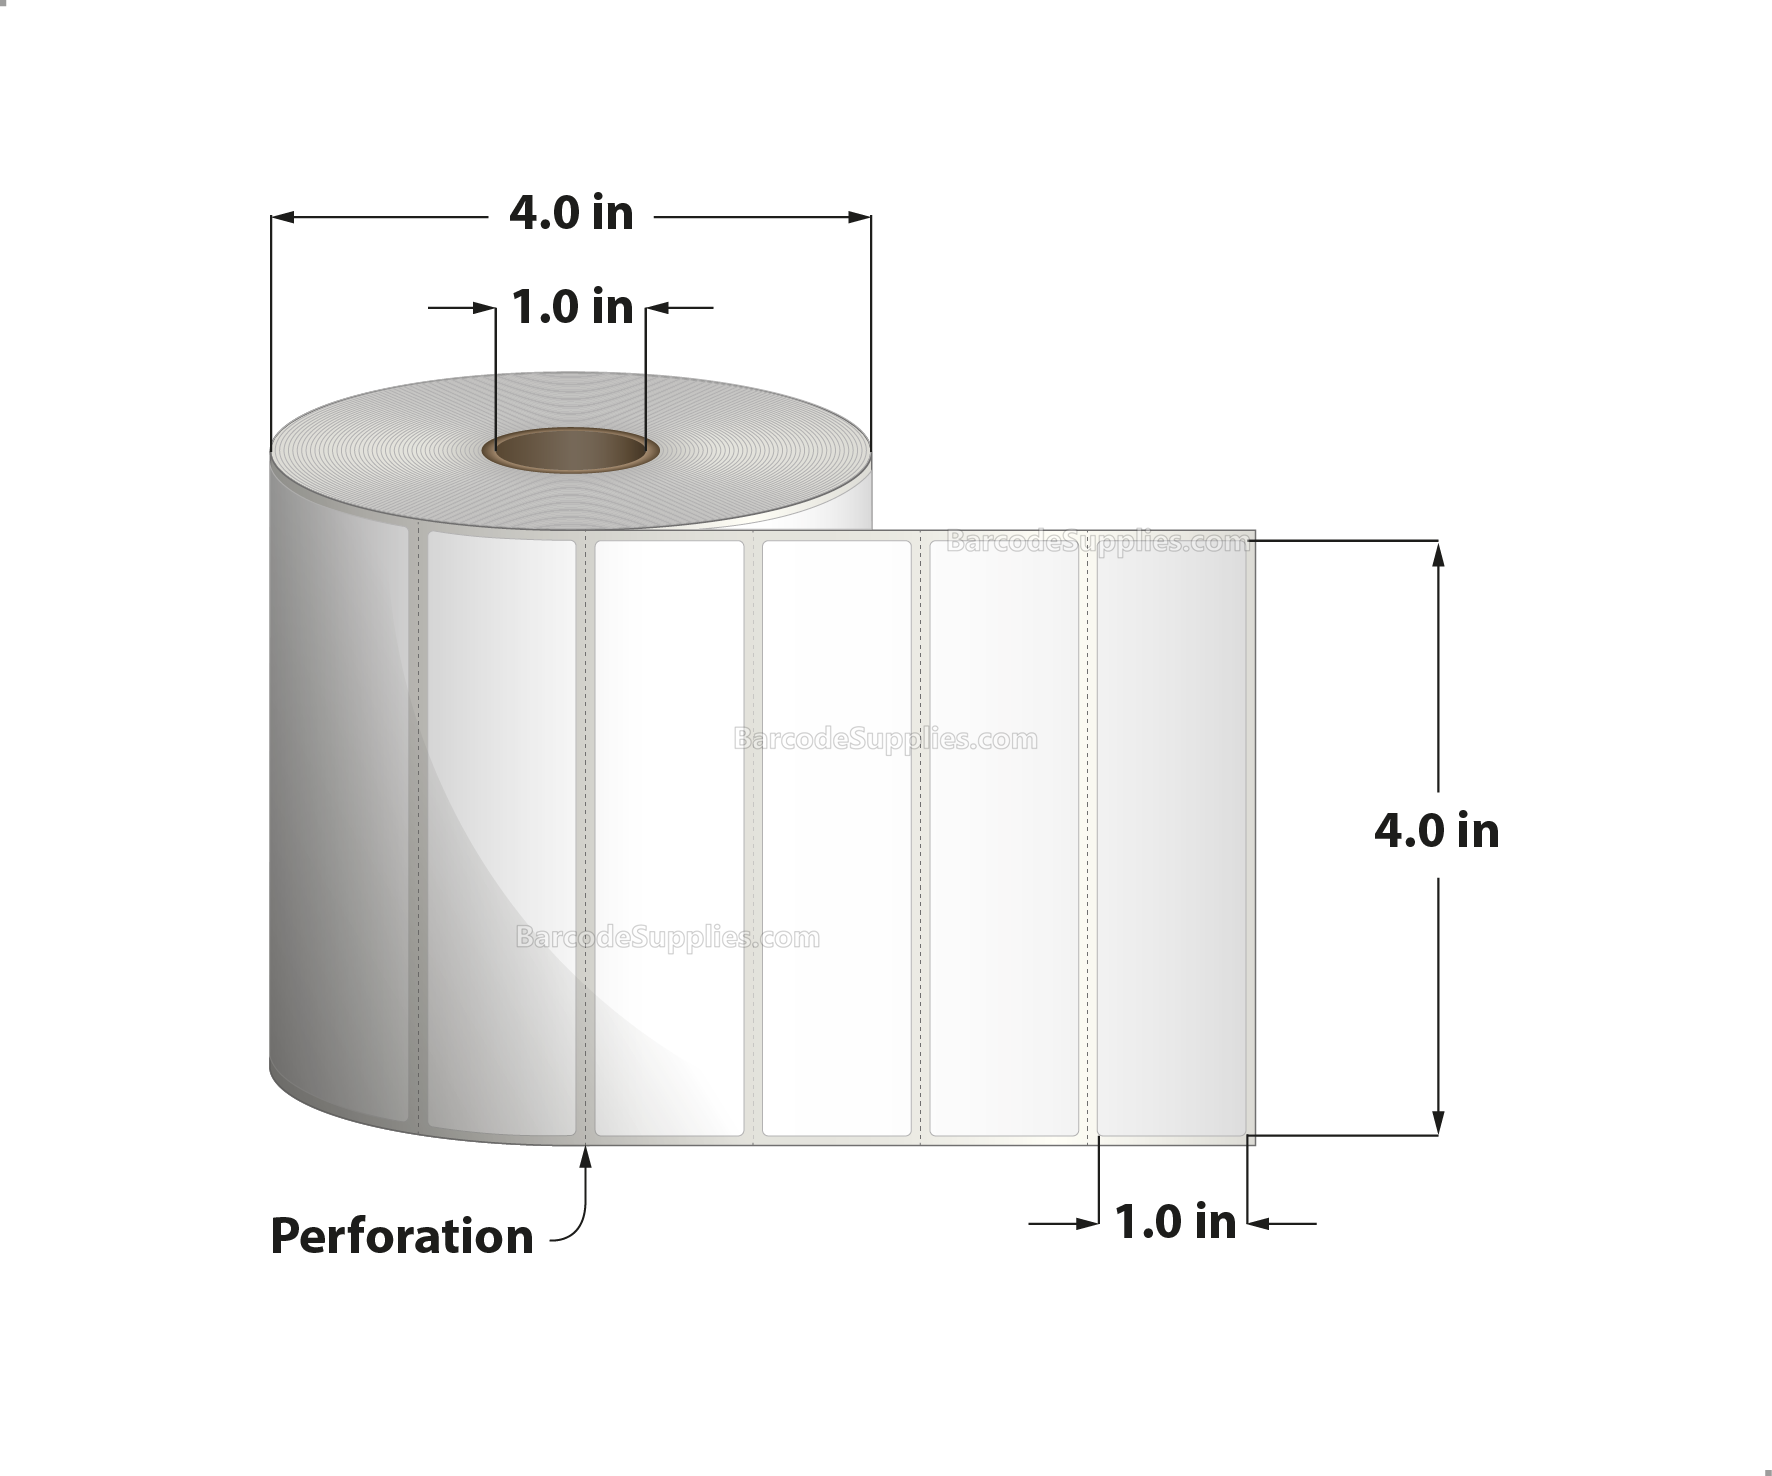 4 x 1 Thermal Transfer White Labels With Rubber Adhesive - Perforated - 1310 Labels Per Roll - Carton Of 12 Rolls - 15720 Labels Total - MPN: RTT4-400100-1P